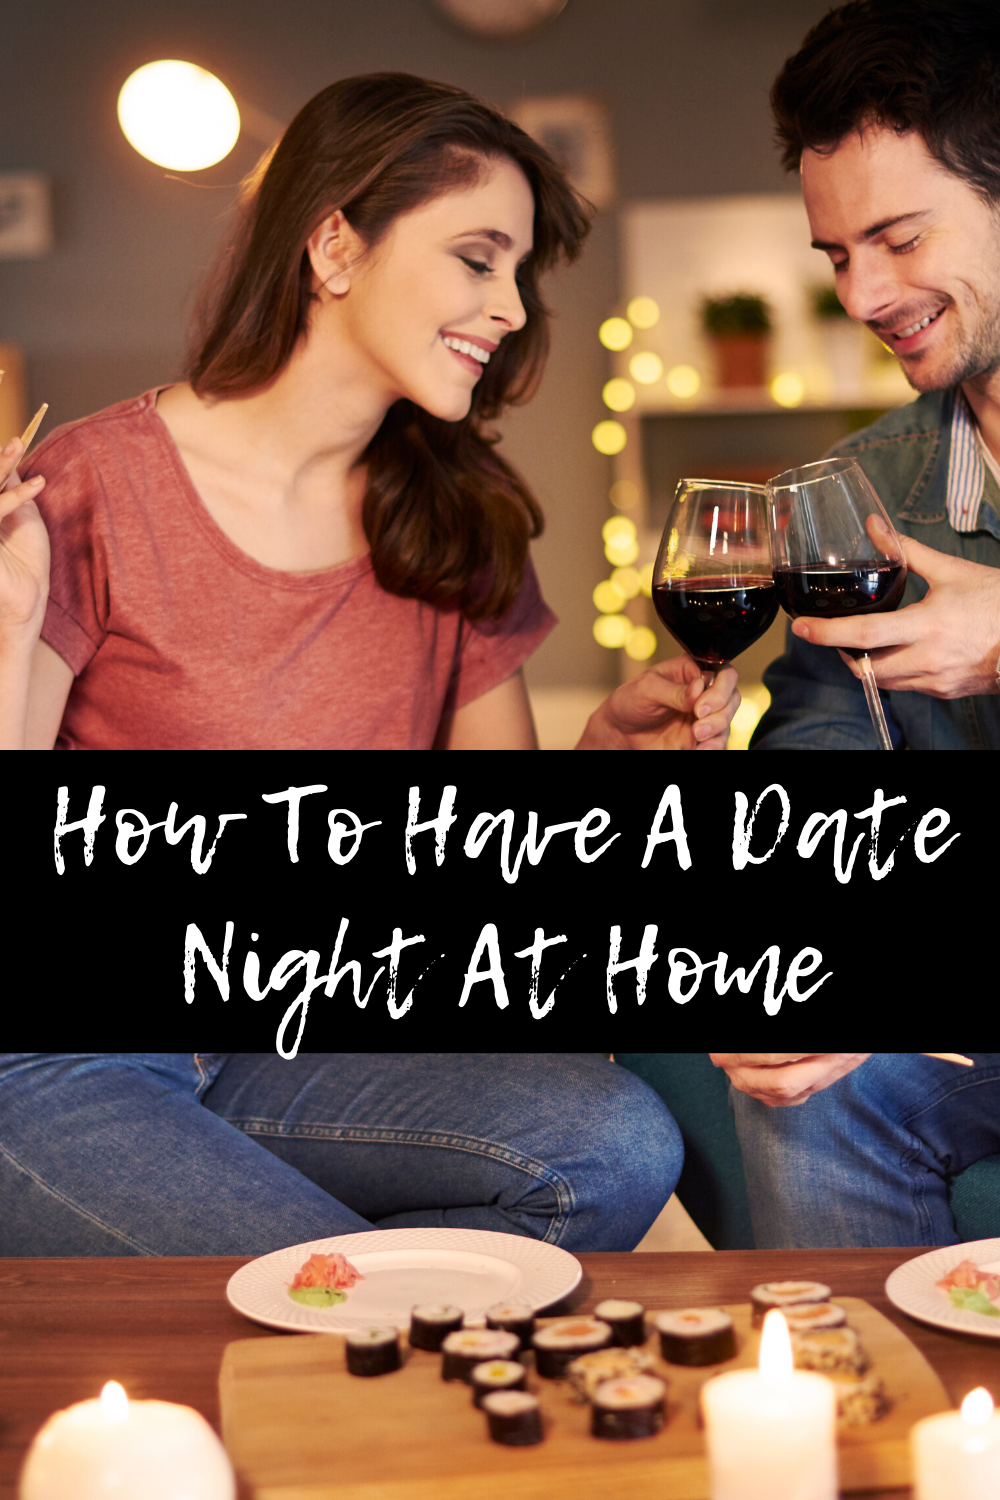 Right now we all need ideas for a fun date night at home. As we work hard to keep our social distance and refrain from gathering in groups we need ideas to keep us busy but connected in our relationships at home. 